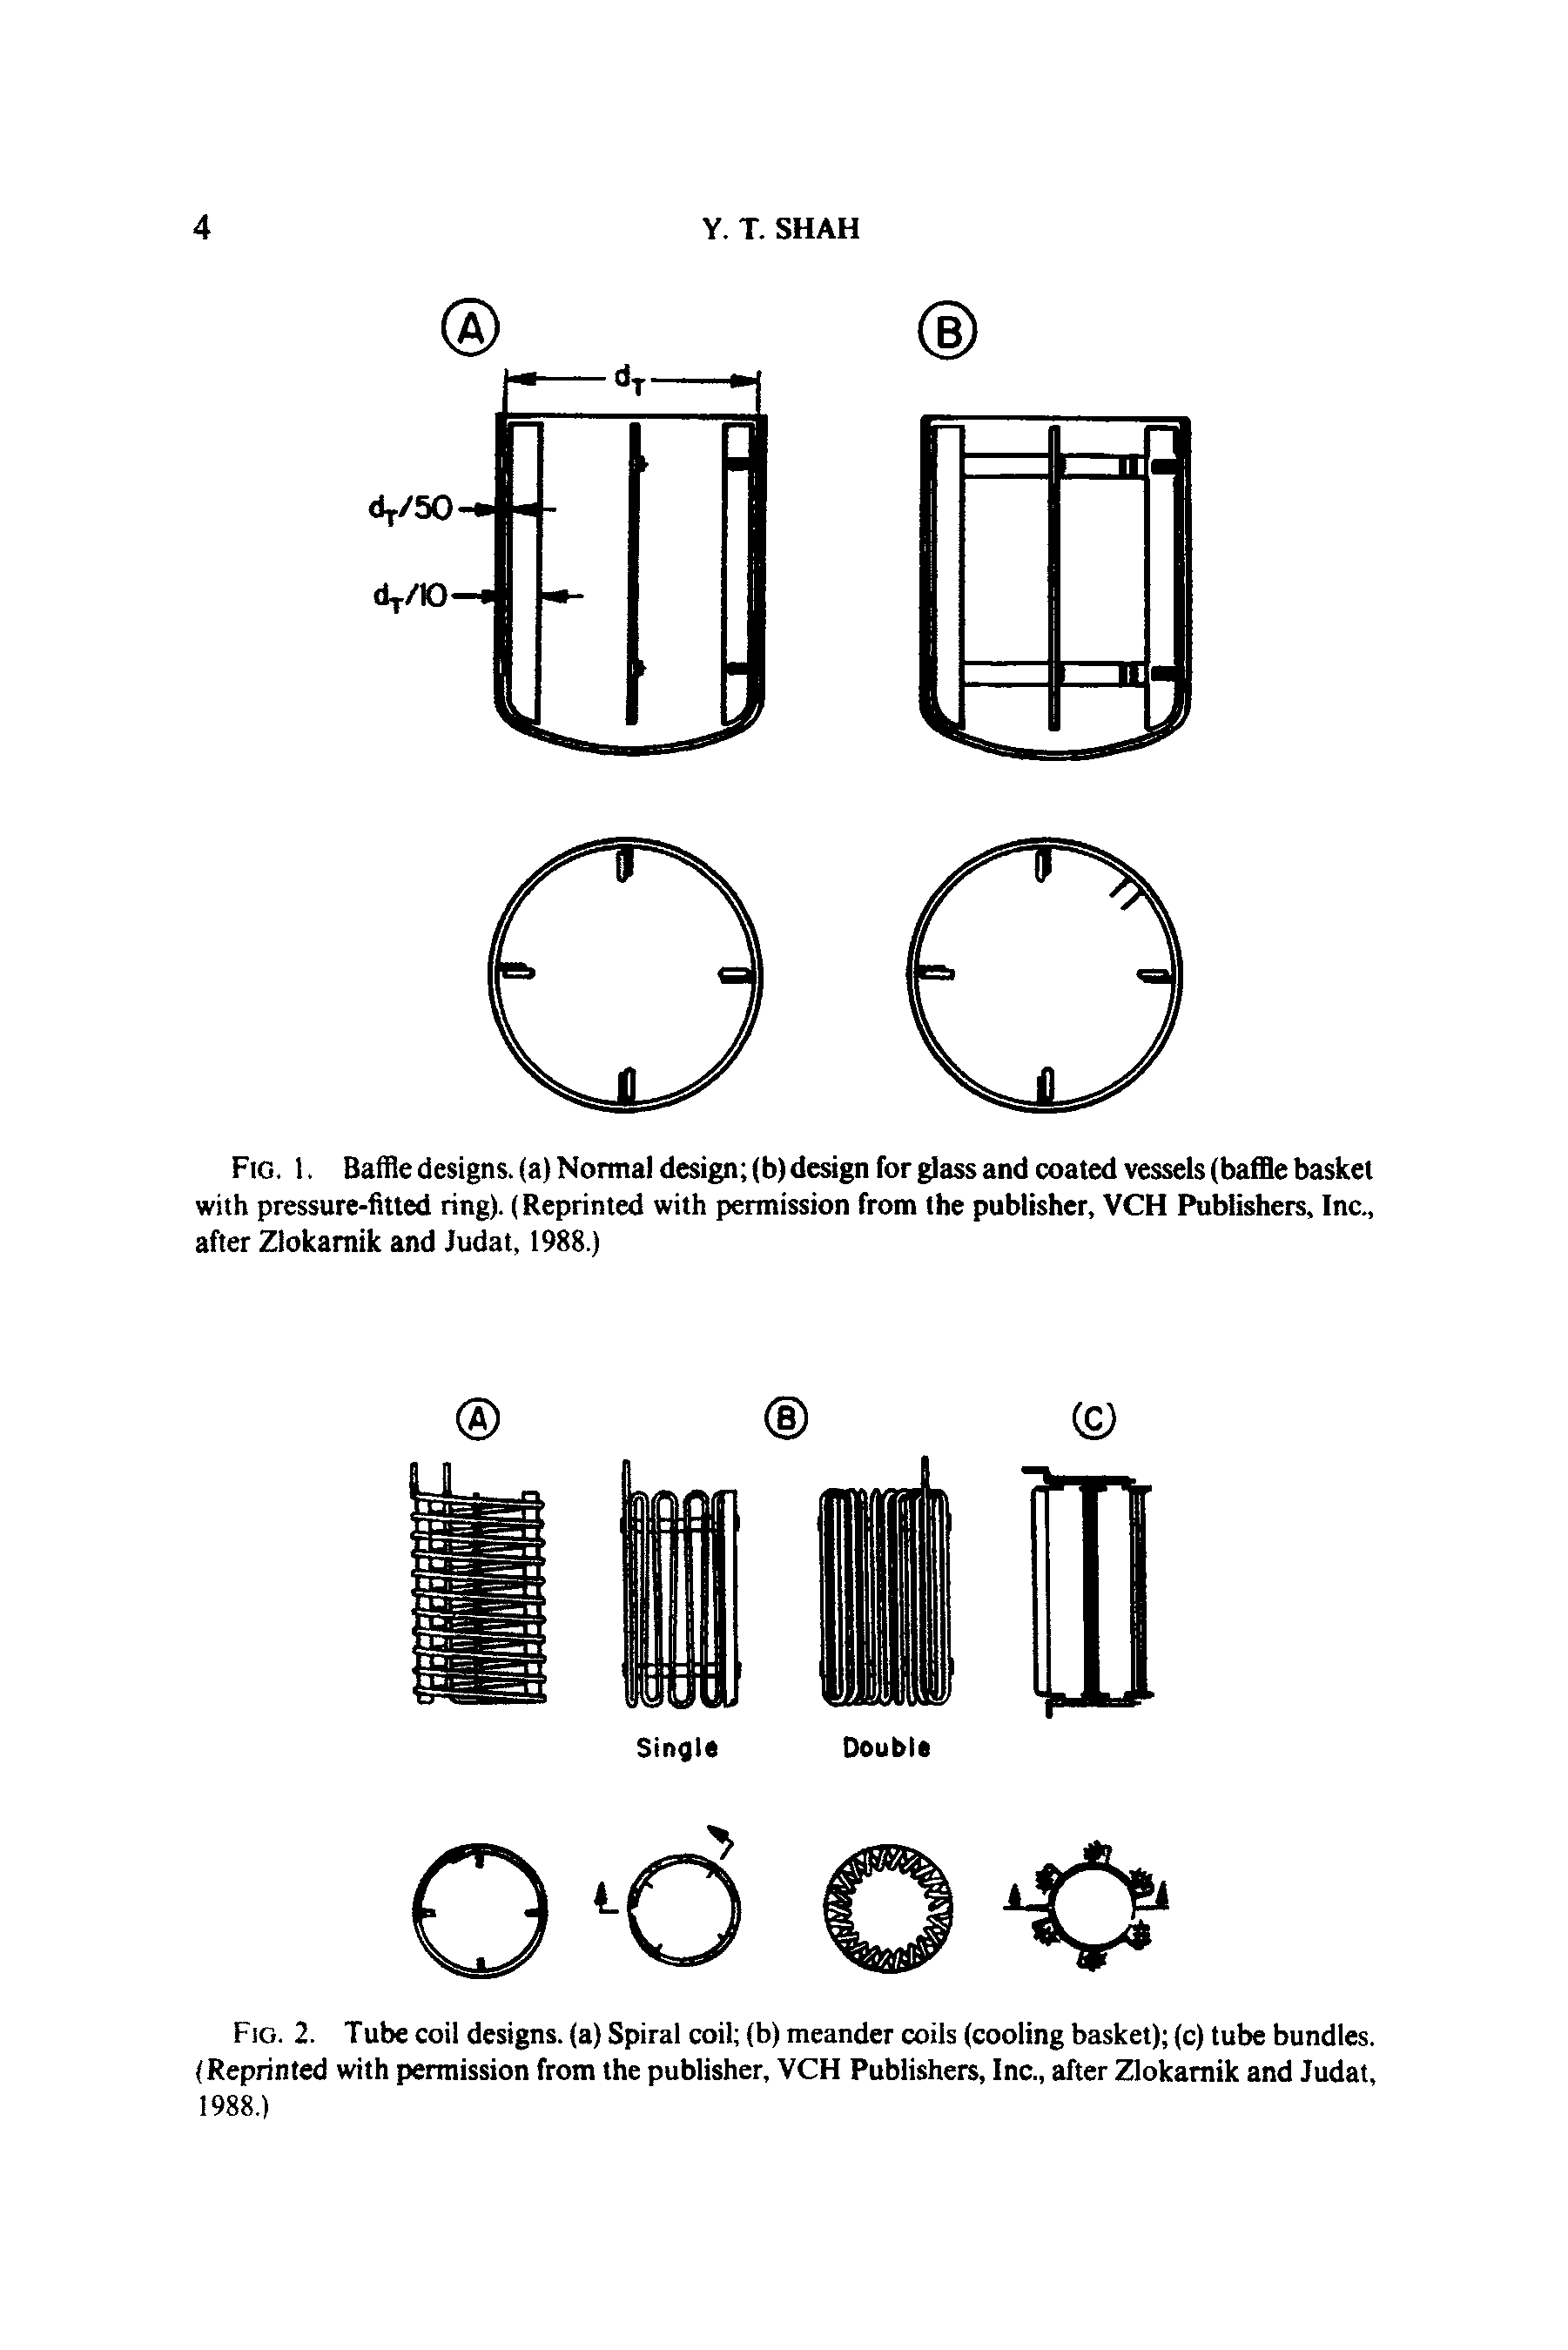 Fig. 2. Tube coil designs, (a) Spiral coil (b) meander coils (cooling basket) (c) tube bundles. (Reprinted with permission from the publisher, VCH Publishers, Inc., after Zlokarnik and Judat,...